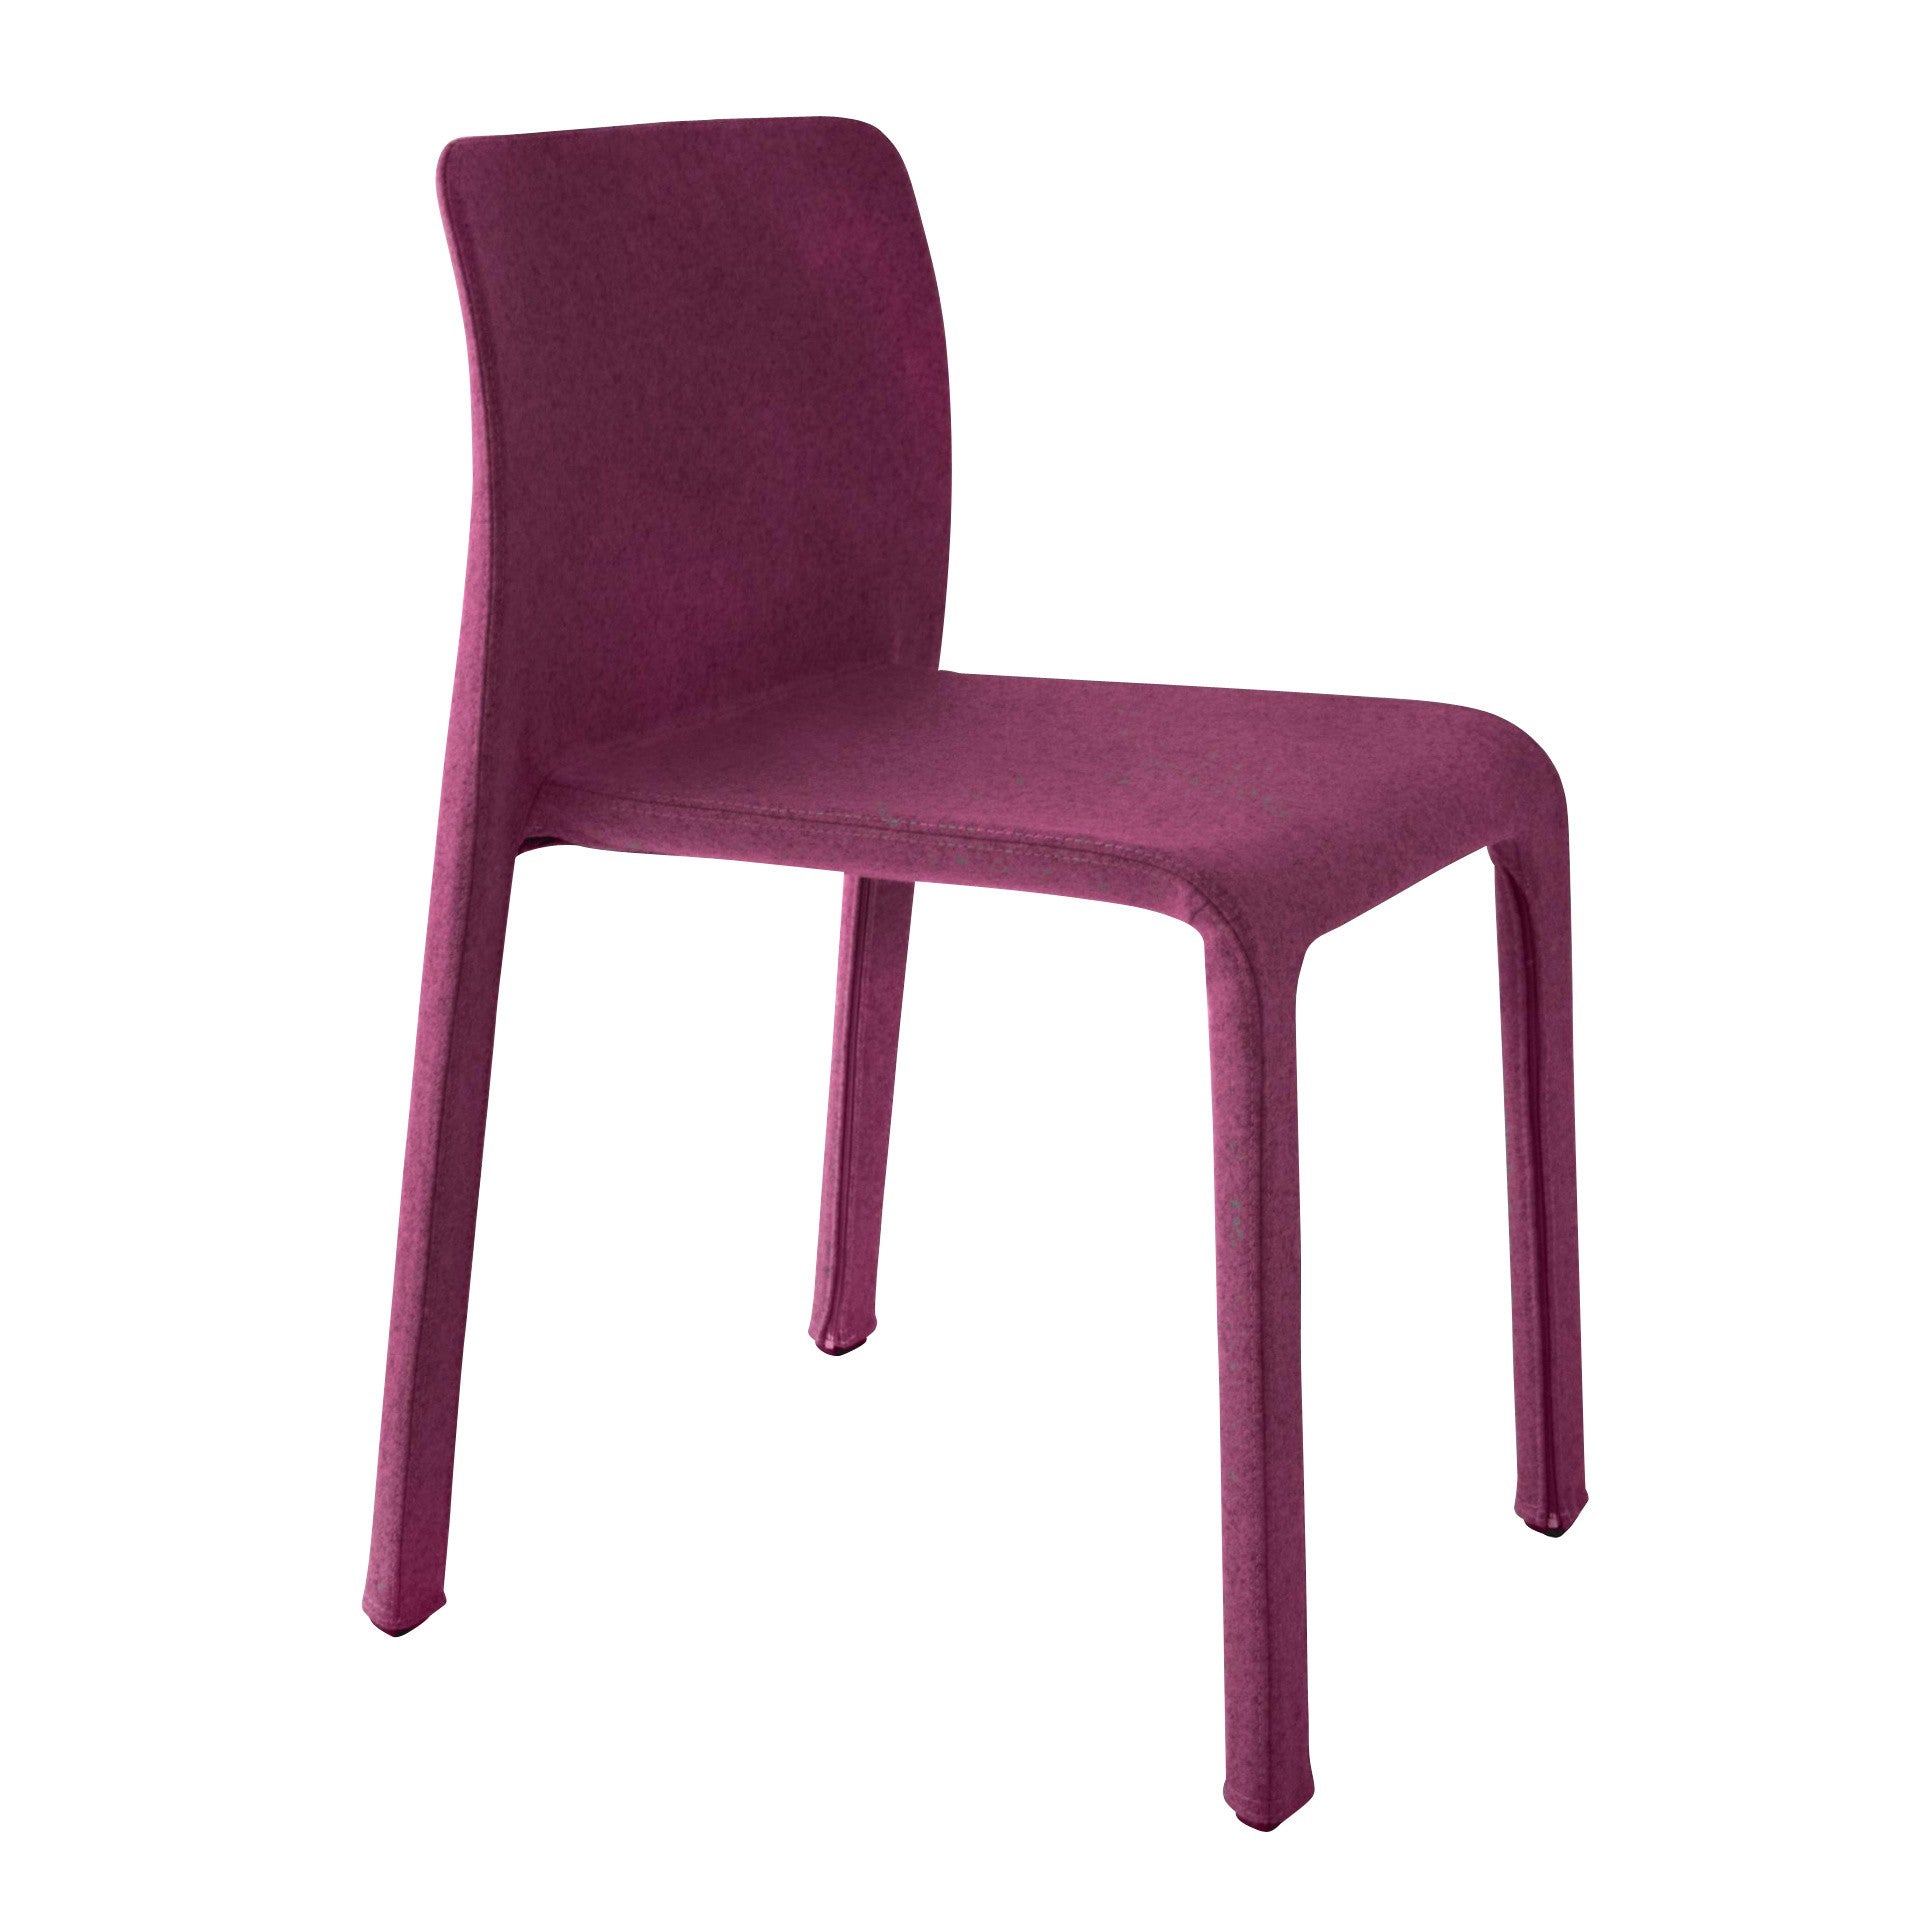 Magis Chair First Dressed 2pcs Stefano Giovannoni